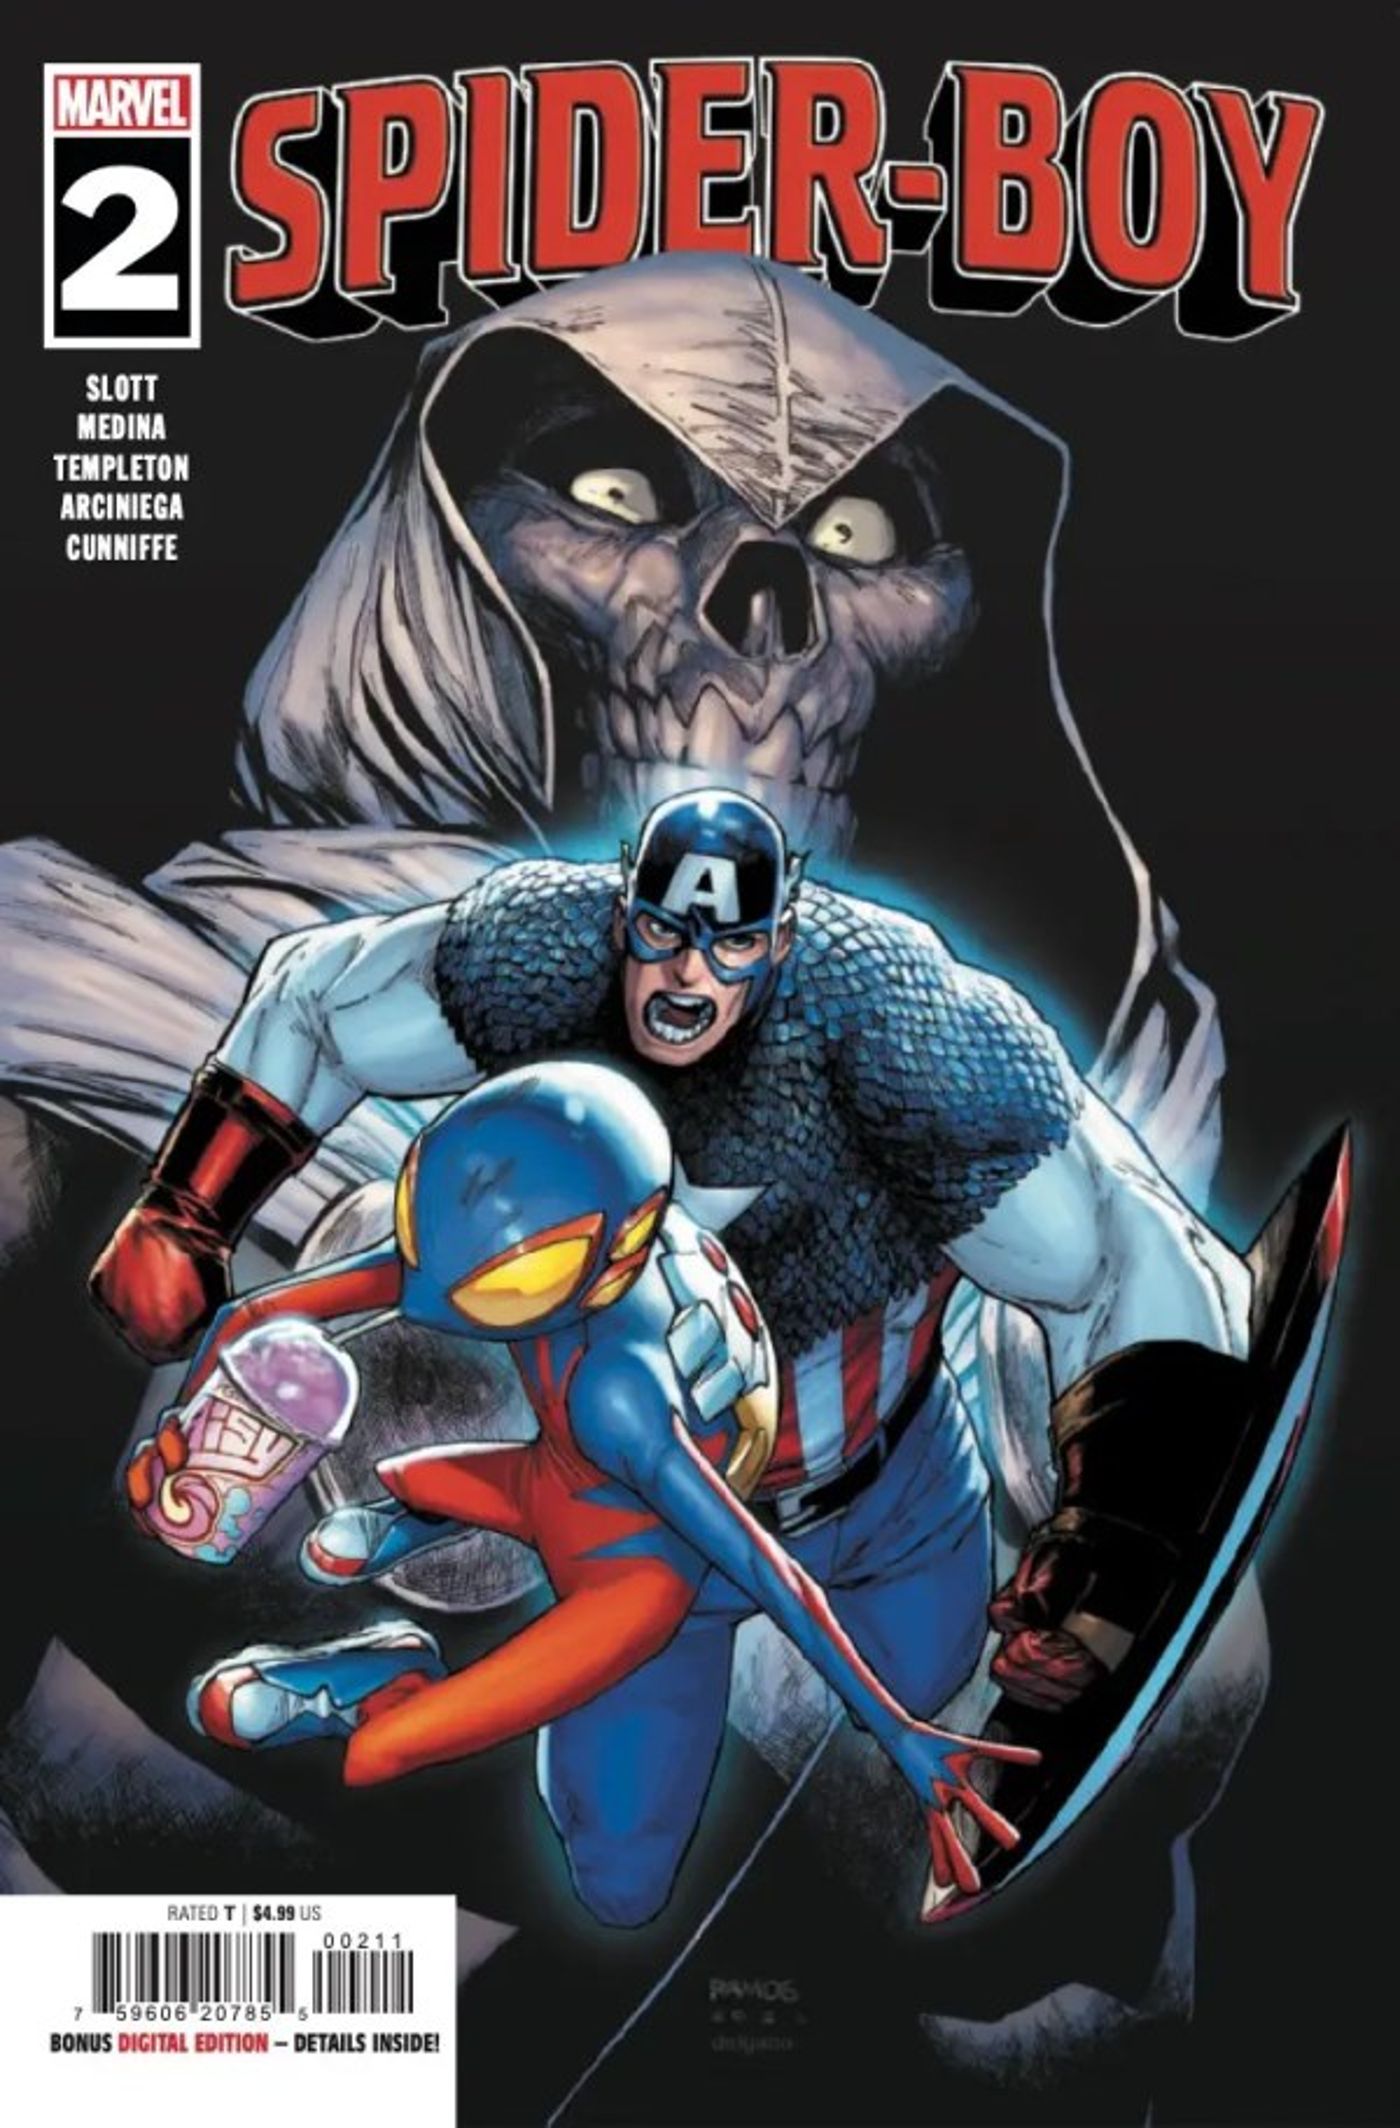 cover for Spider-Boy#2, featuring Captain America, by Humberto Ramos